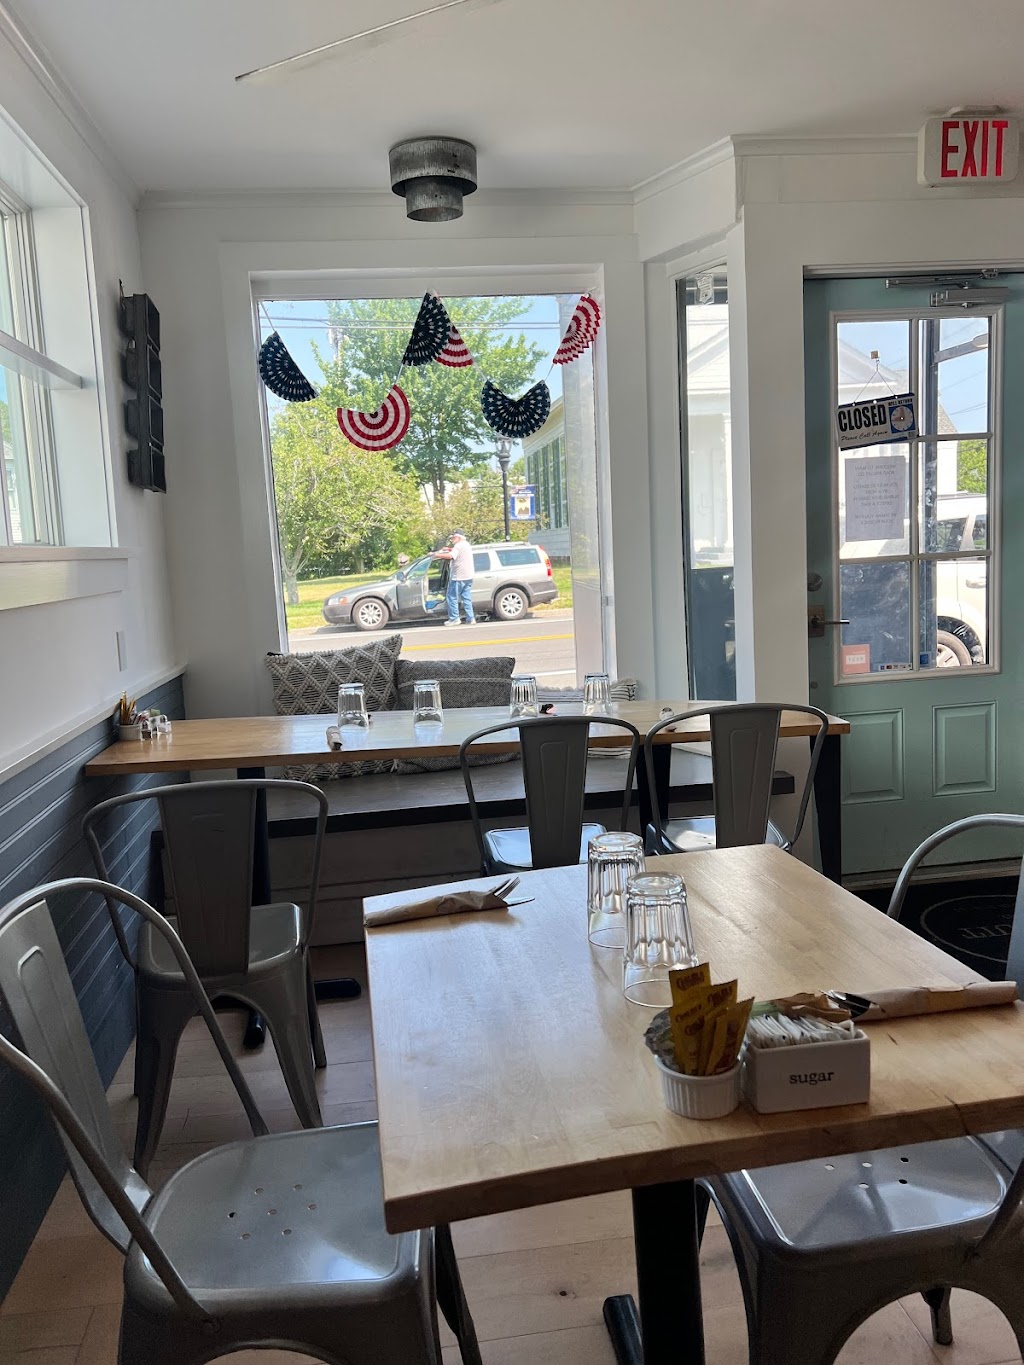 Main Road Biscuit Co. | 1601 Main Rd, Jamesport, NY 11947 | Phone: (631) 779-3463